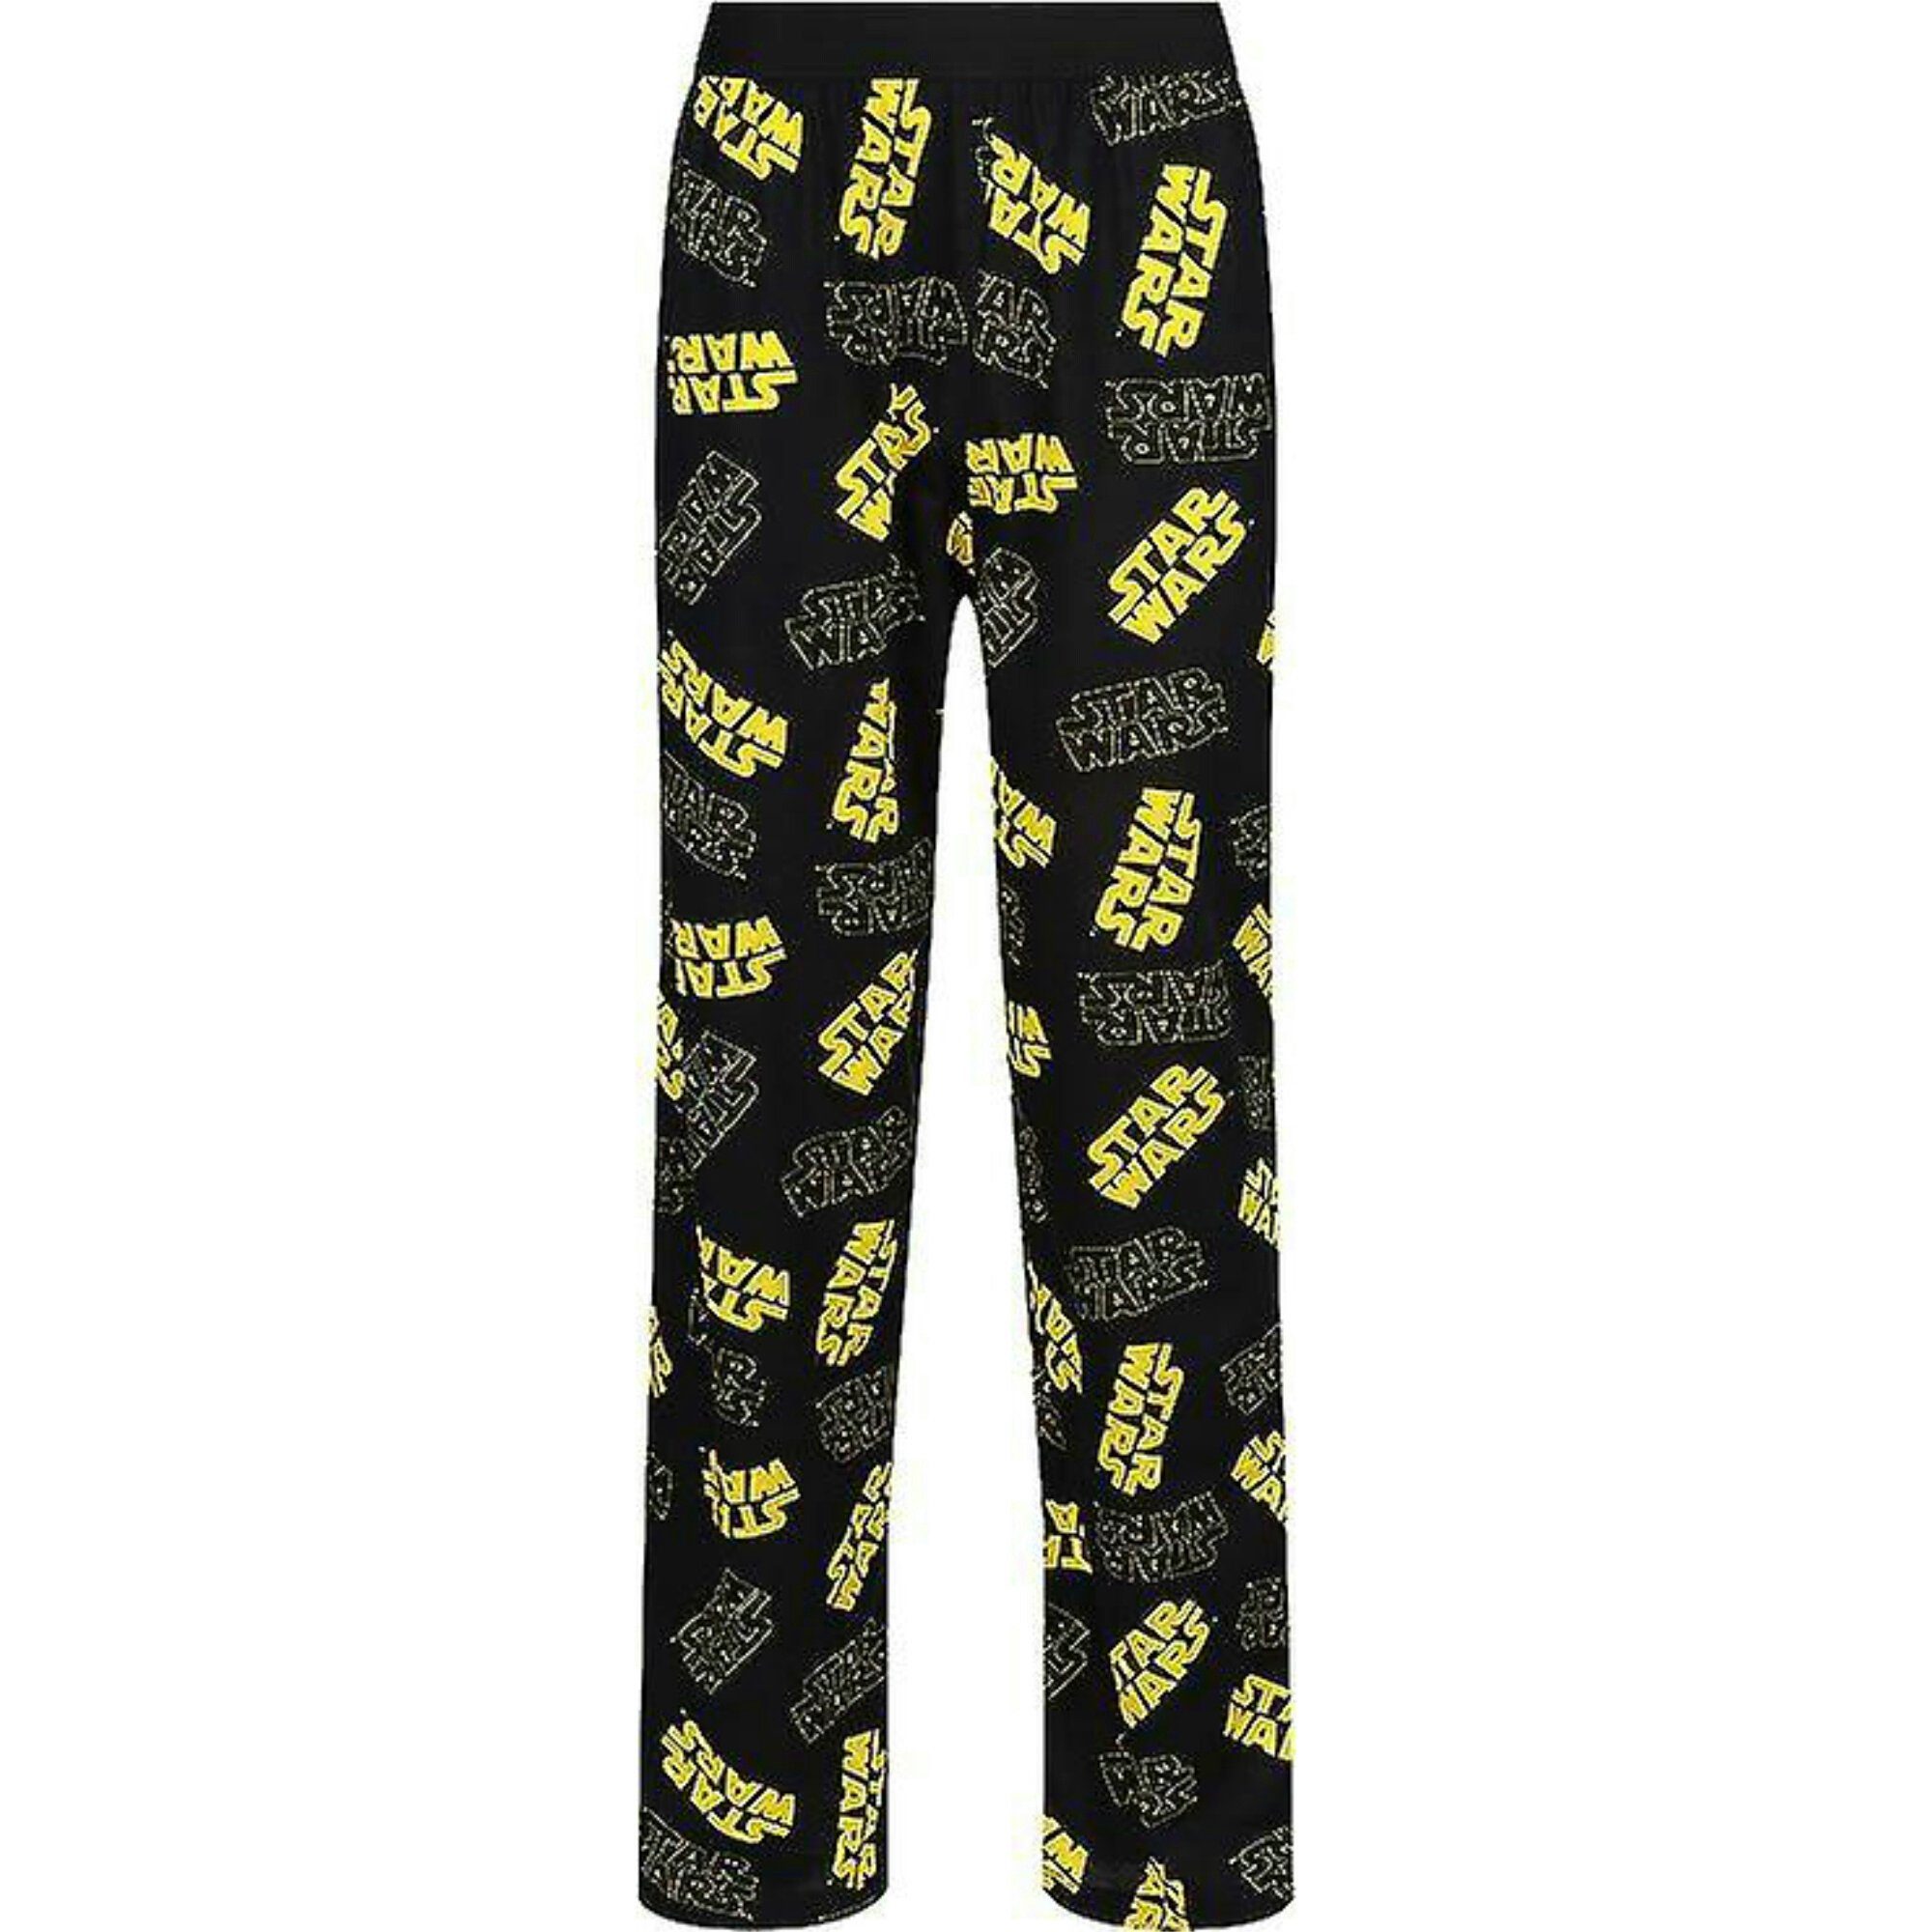 Recovered Loungepants Loungepants - Star Wars Allover print Logo -black and yellow